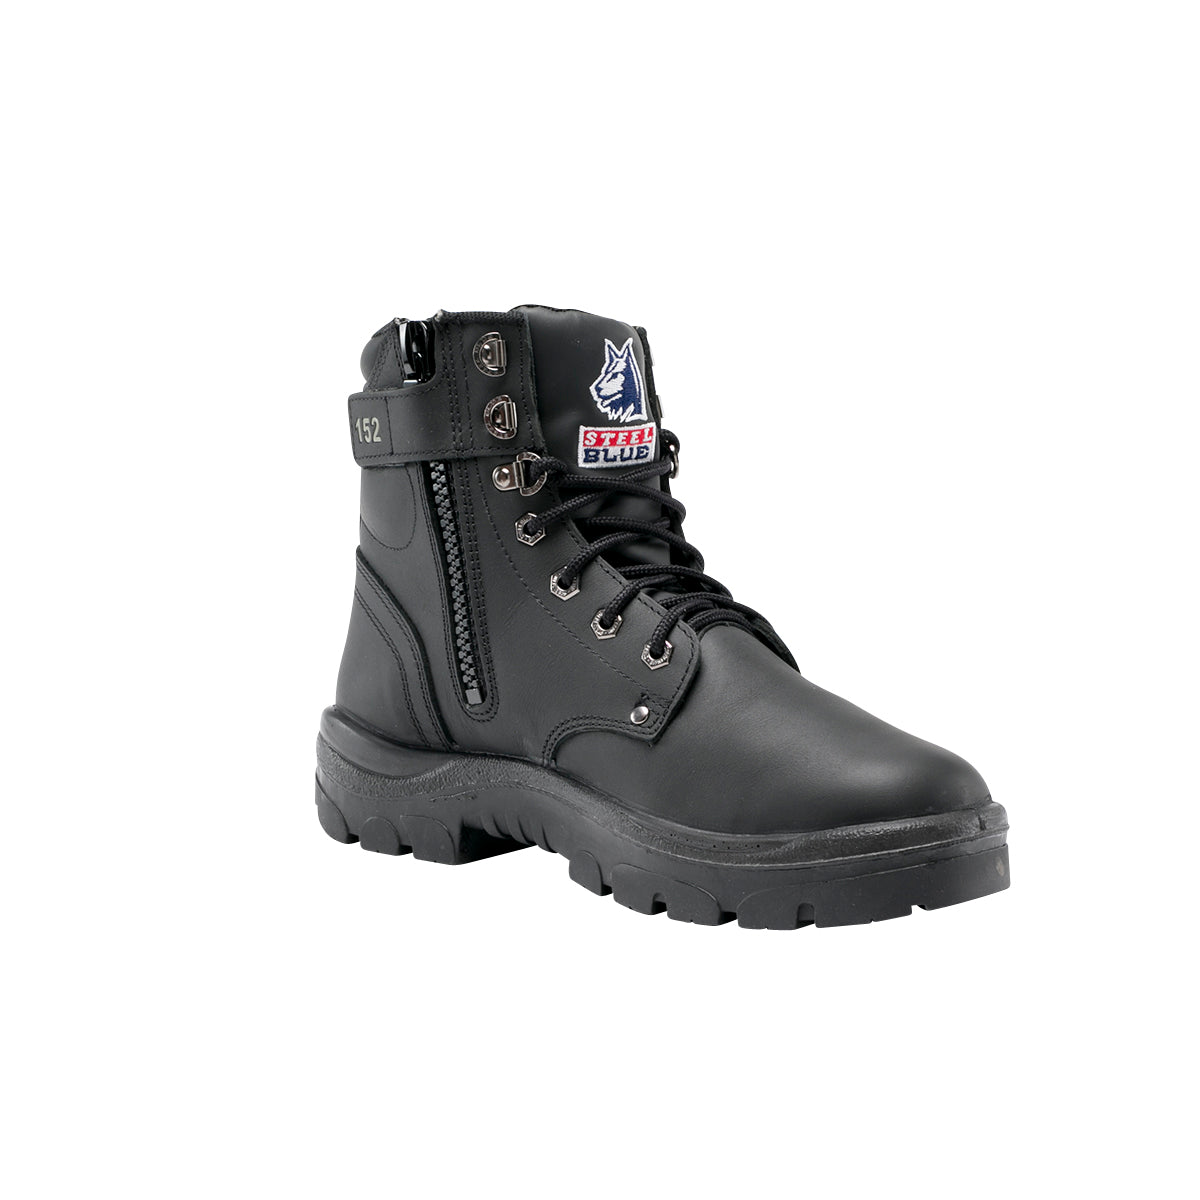 Steel Blue 312152 Argyle Safety Boots with Zip